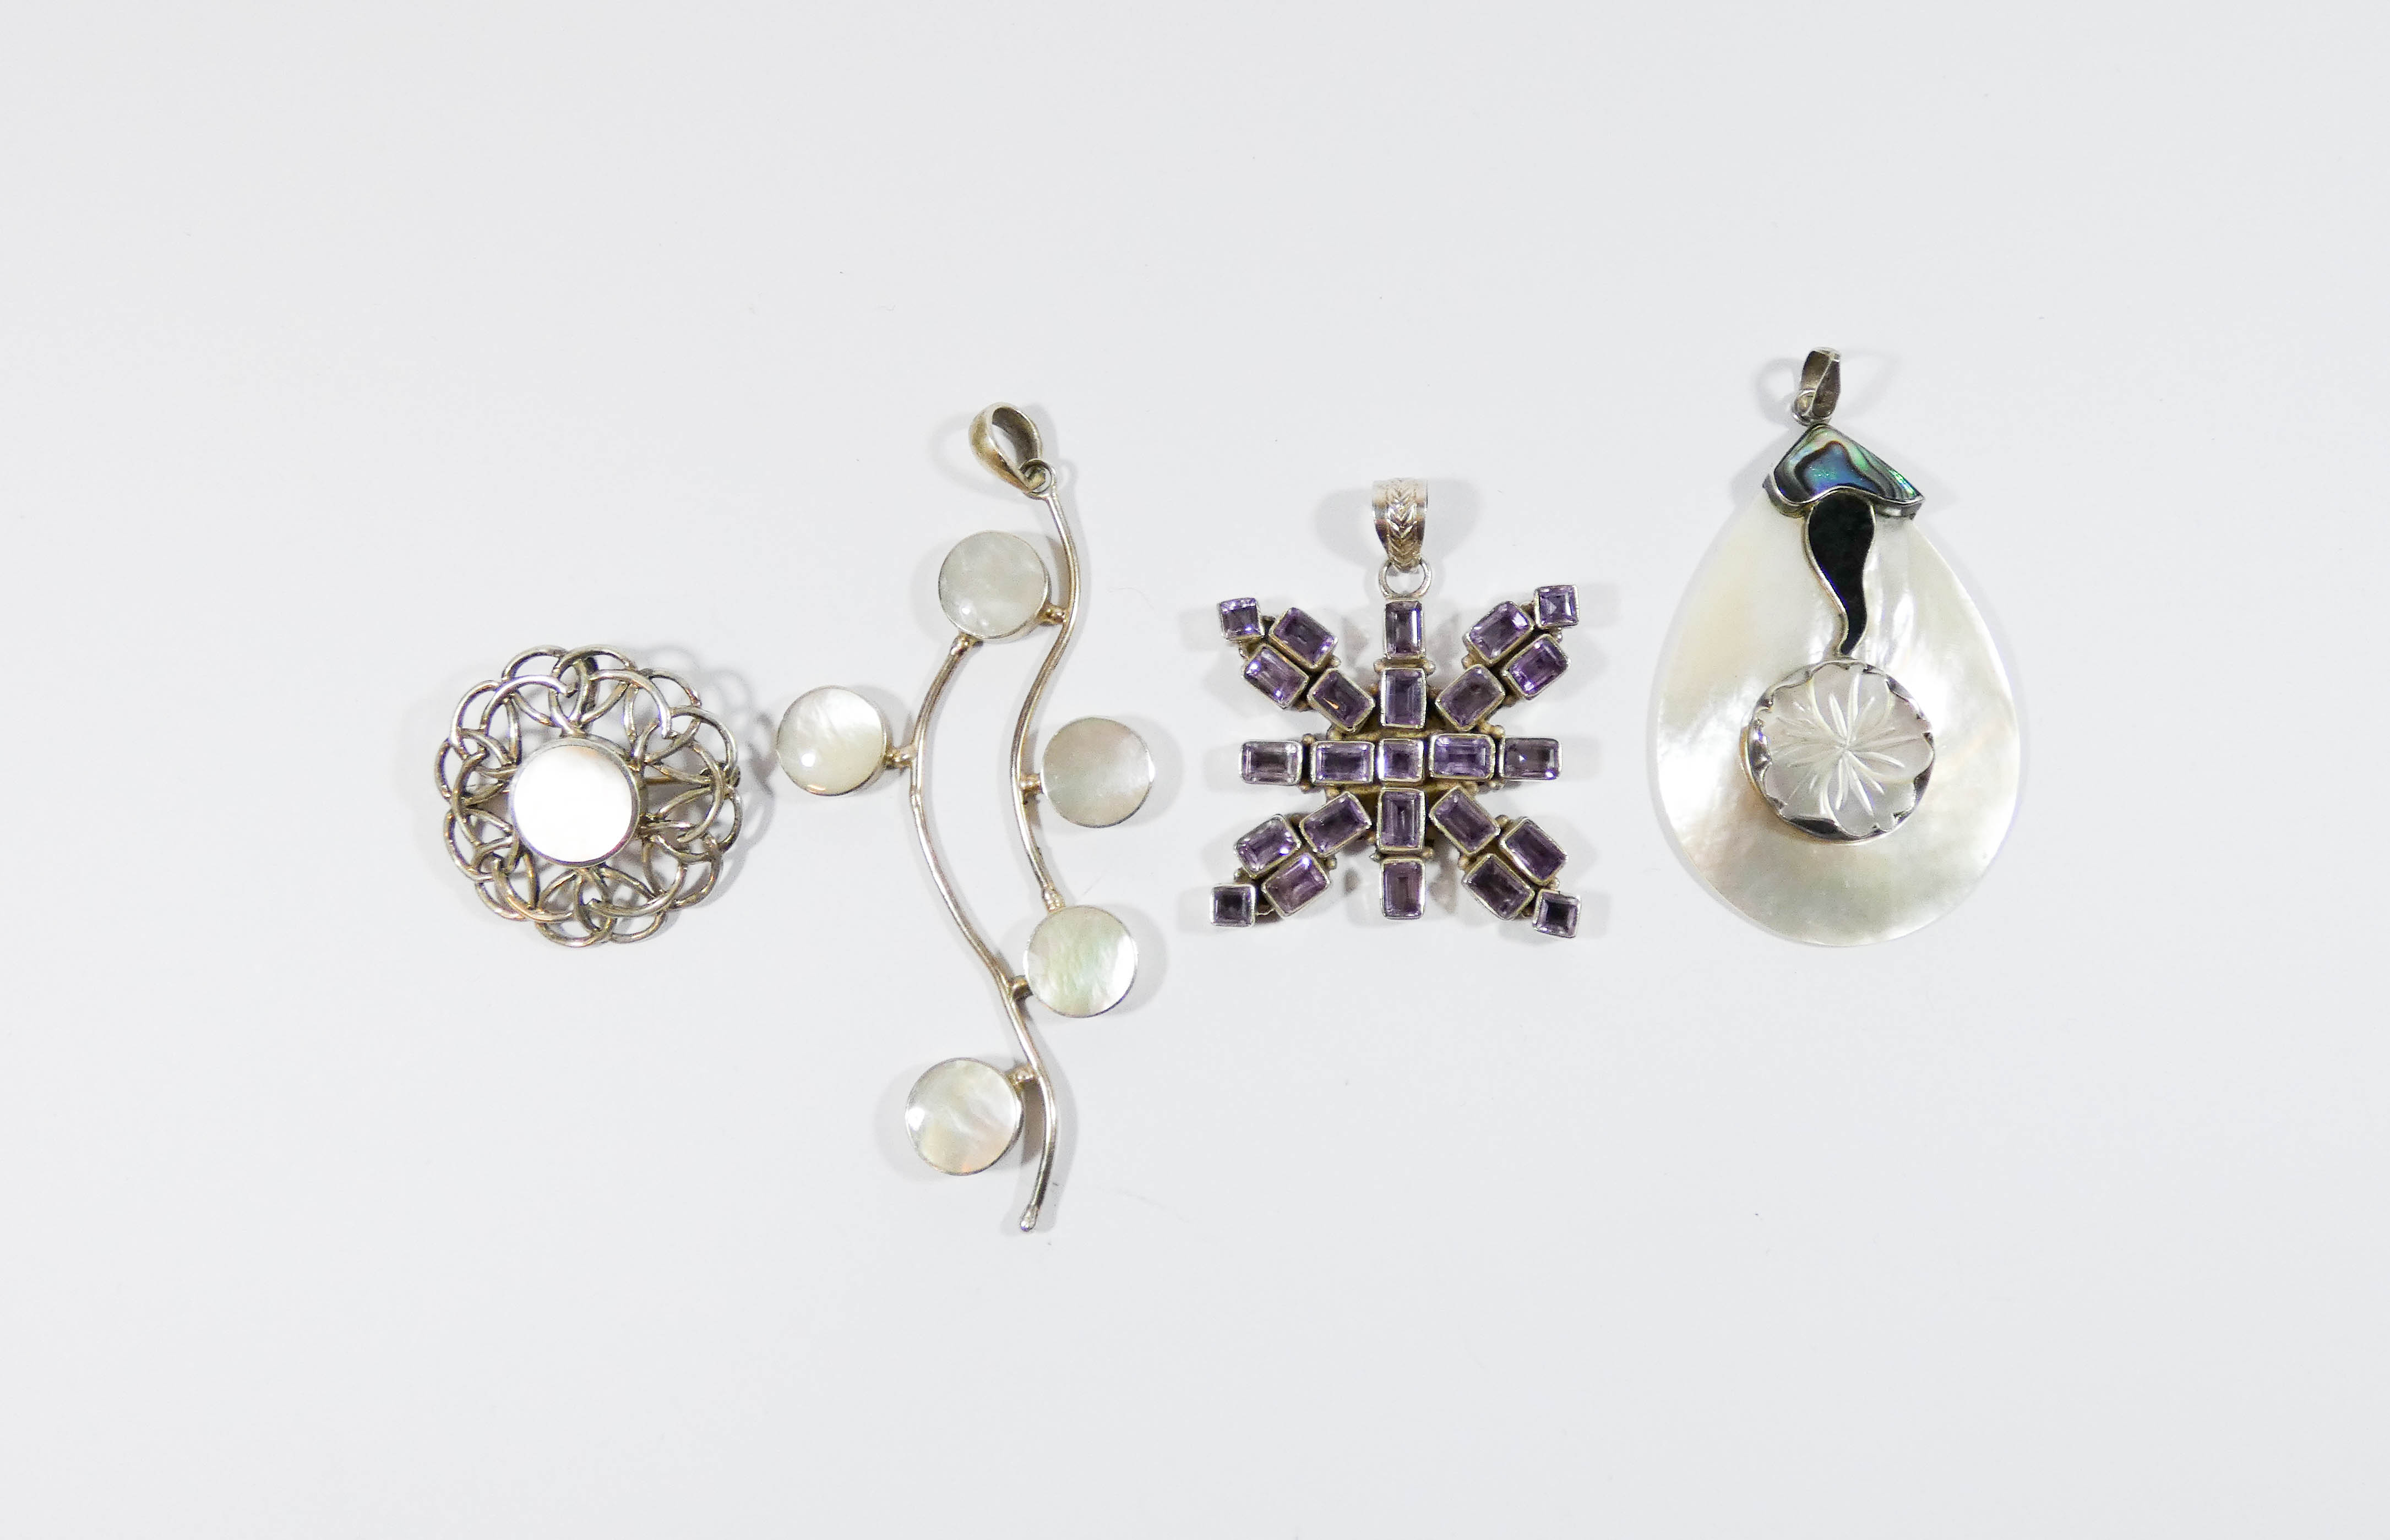 A collection of silver jewellery - mother of pearl set pendants, - Image 2 of 5